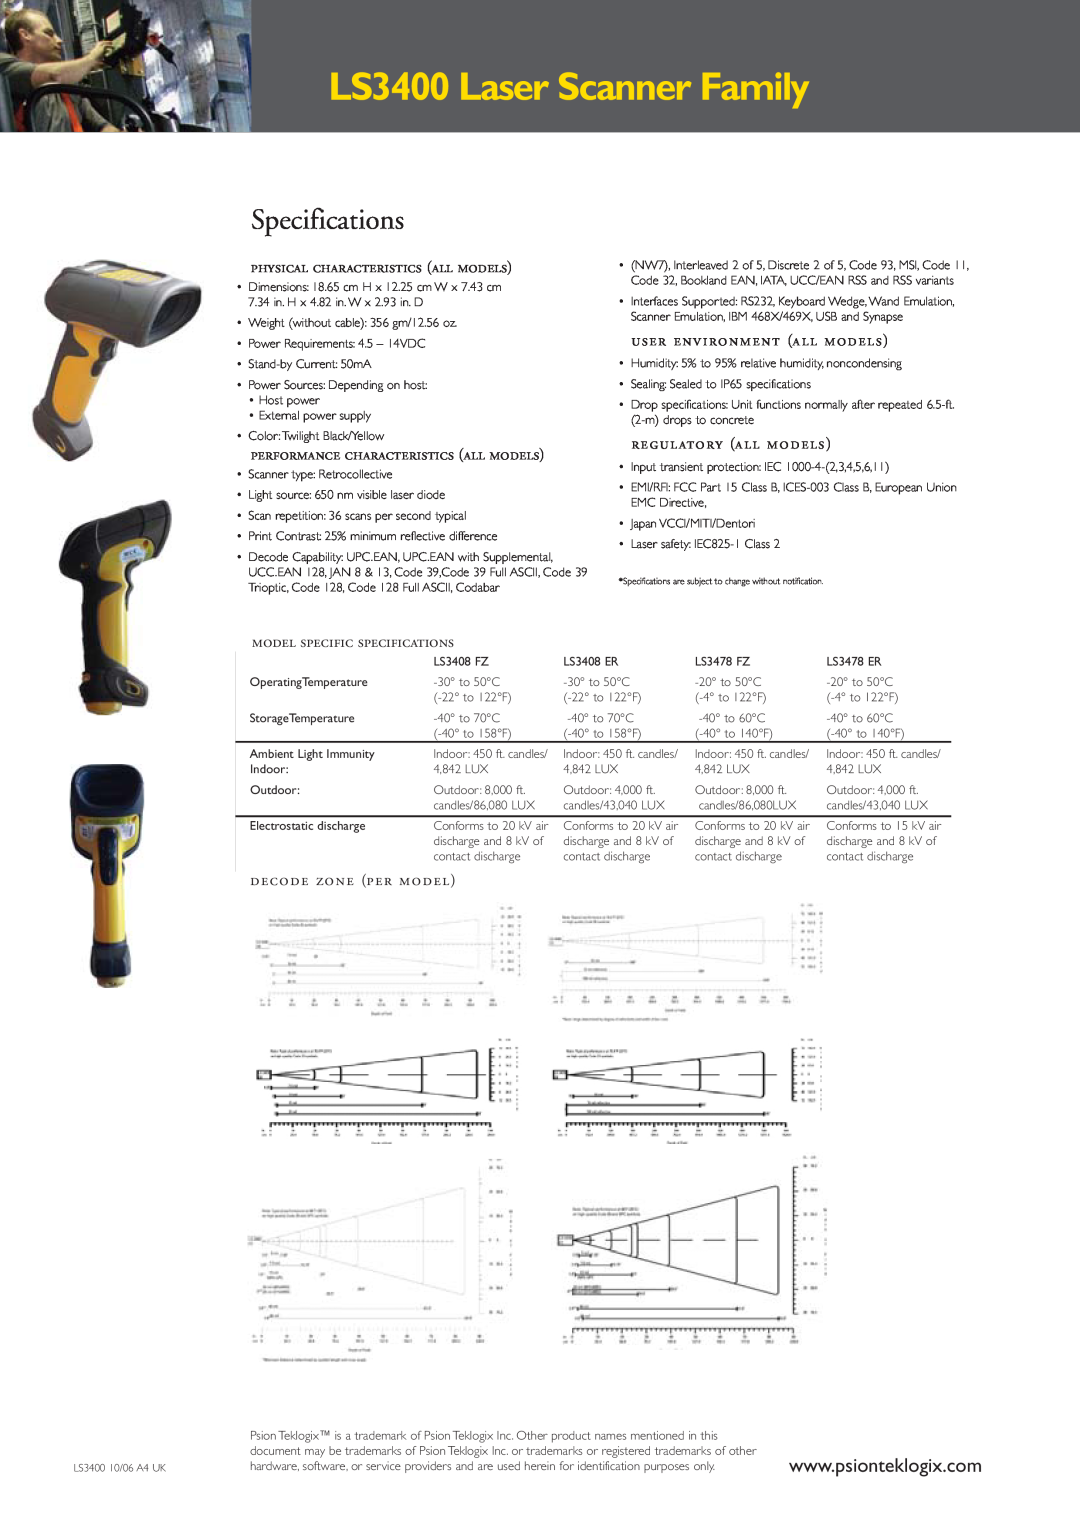 Psion Teklogix LS3400 Laser Scanner Family, Specifications, physical characteristics all models, regul atory all models 